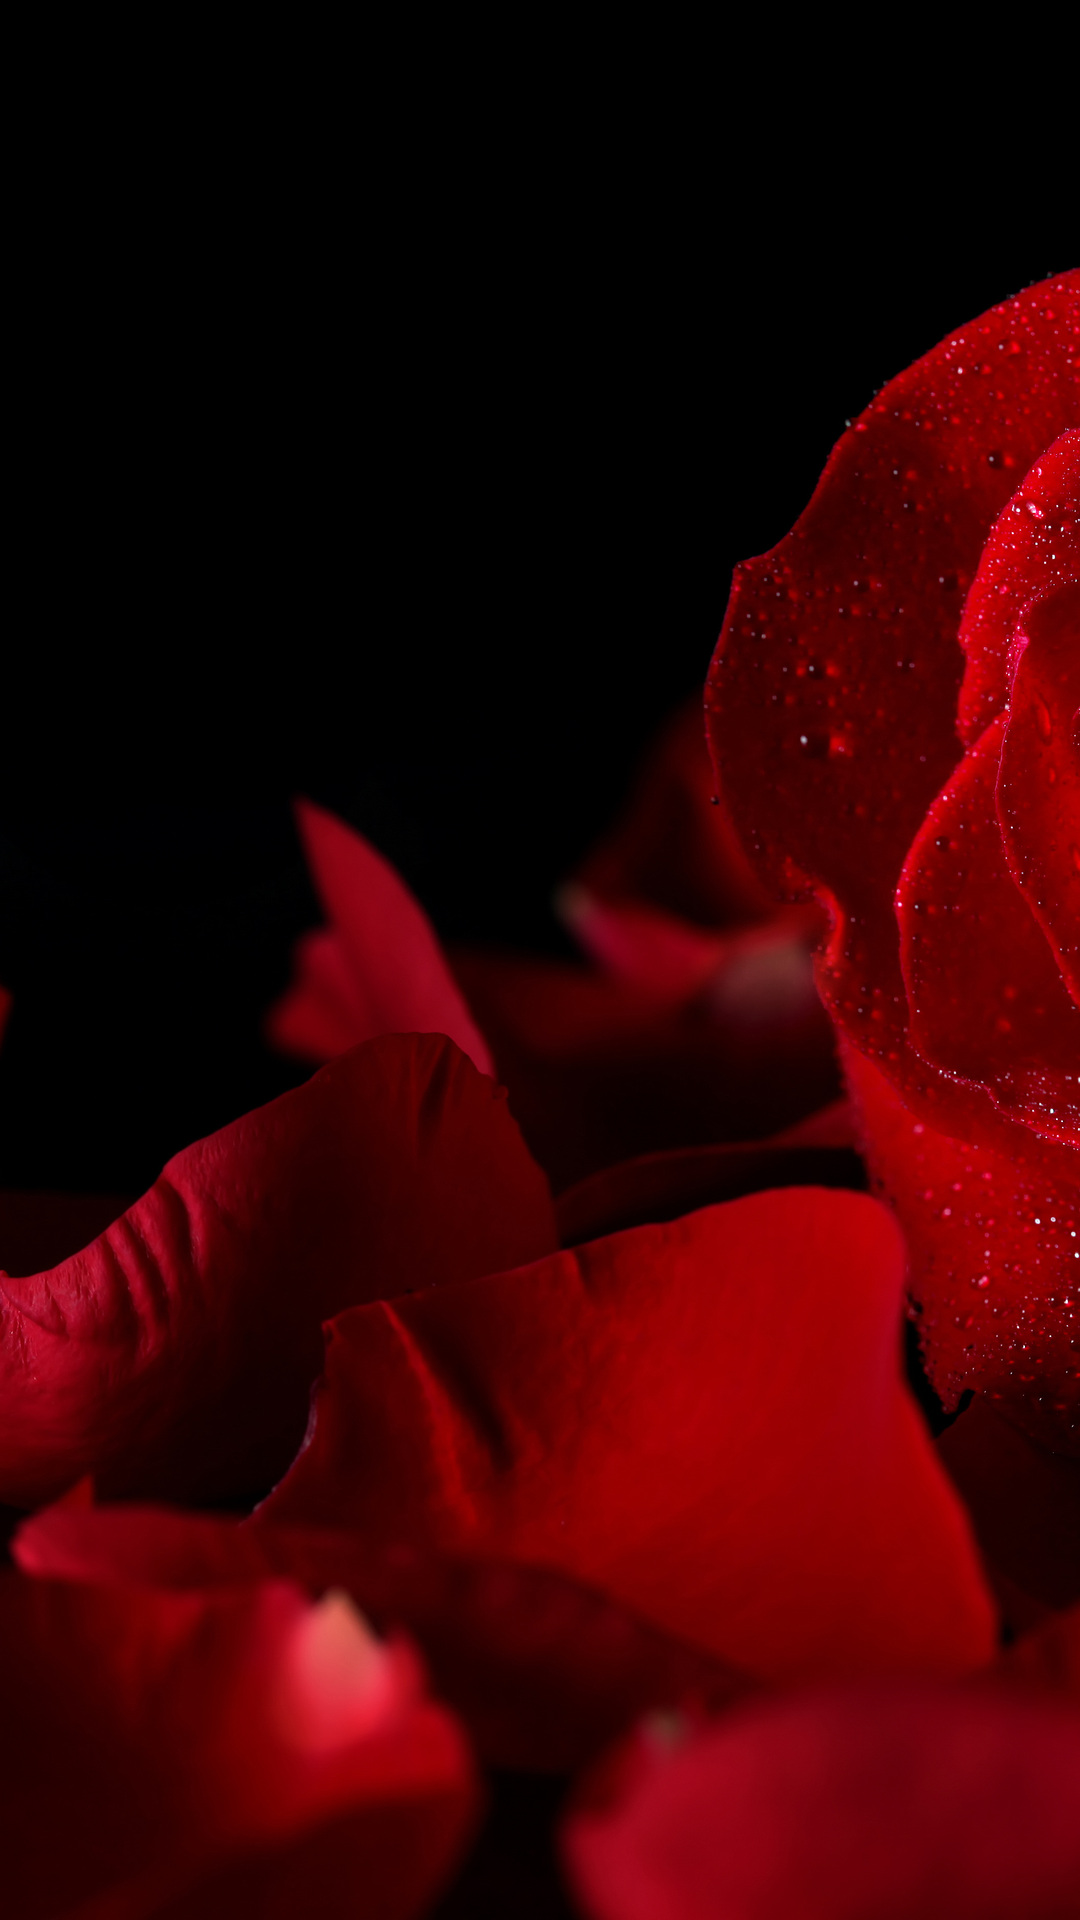 Background, Flowers, Rose, Petals, Black, Drops, Bud, - Flowers Red And Black Rose - HD Wallpaper 